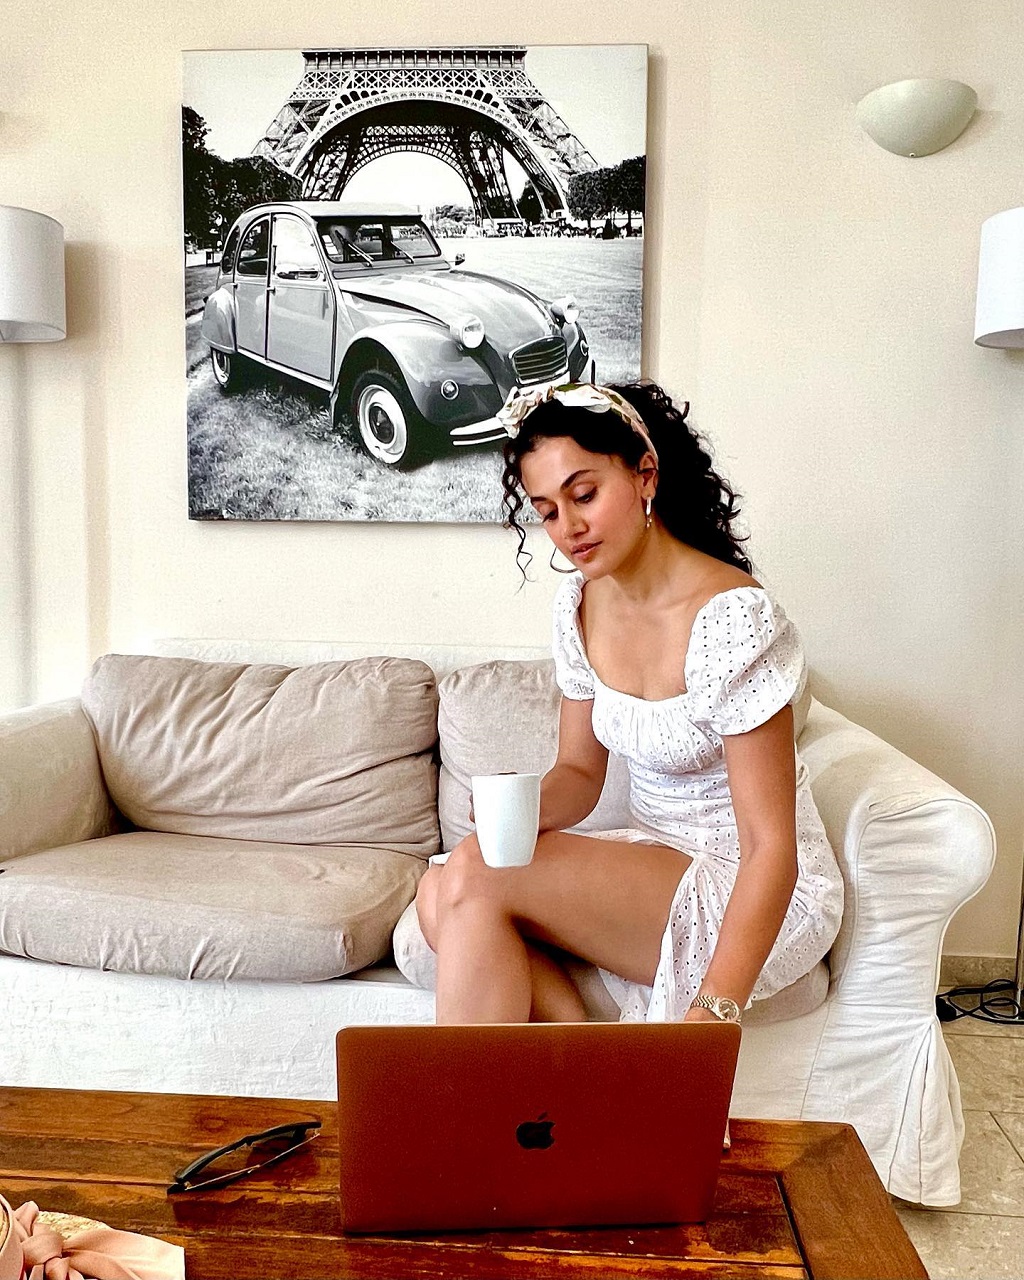 Taapsee Pannu in a white dress seating on a couch while holding a white mug and looking at her MacBook